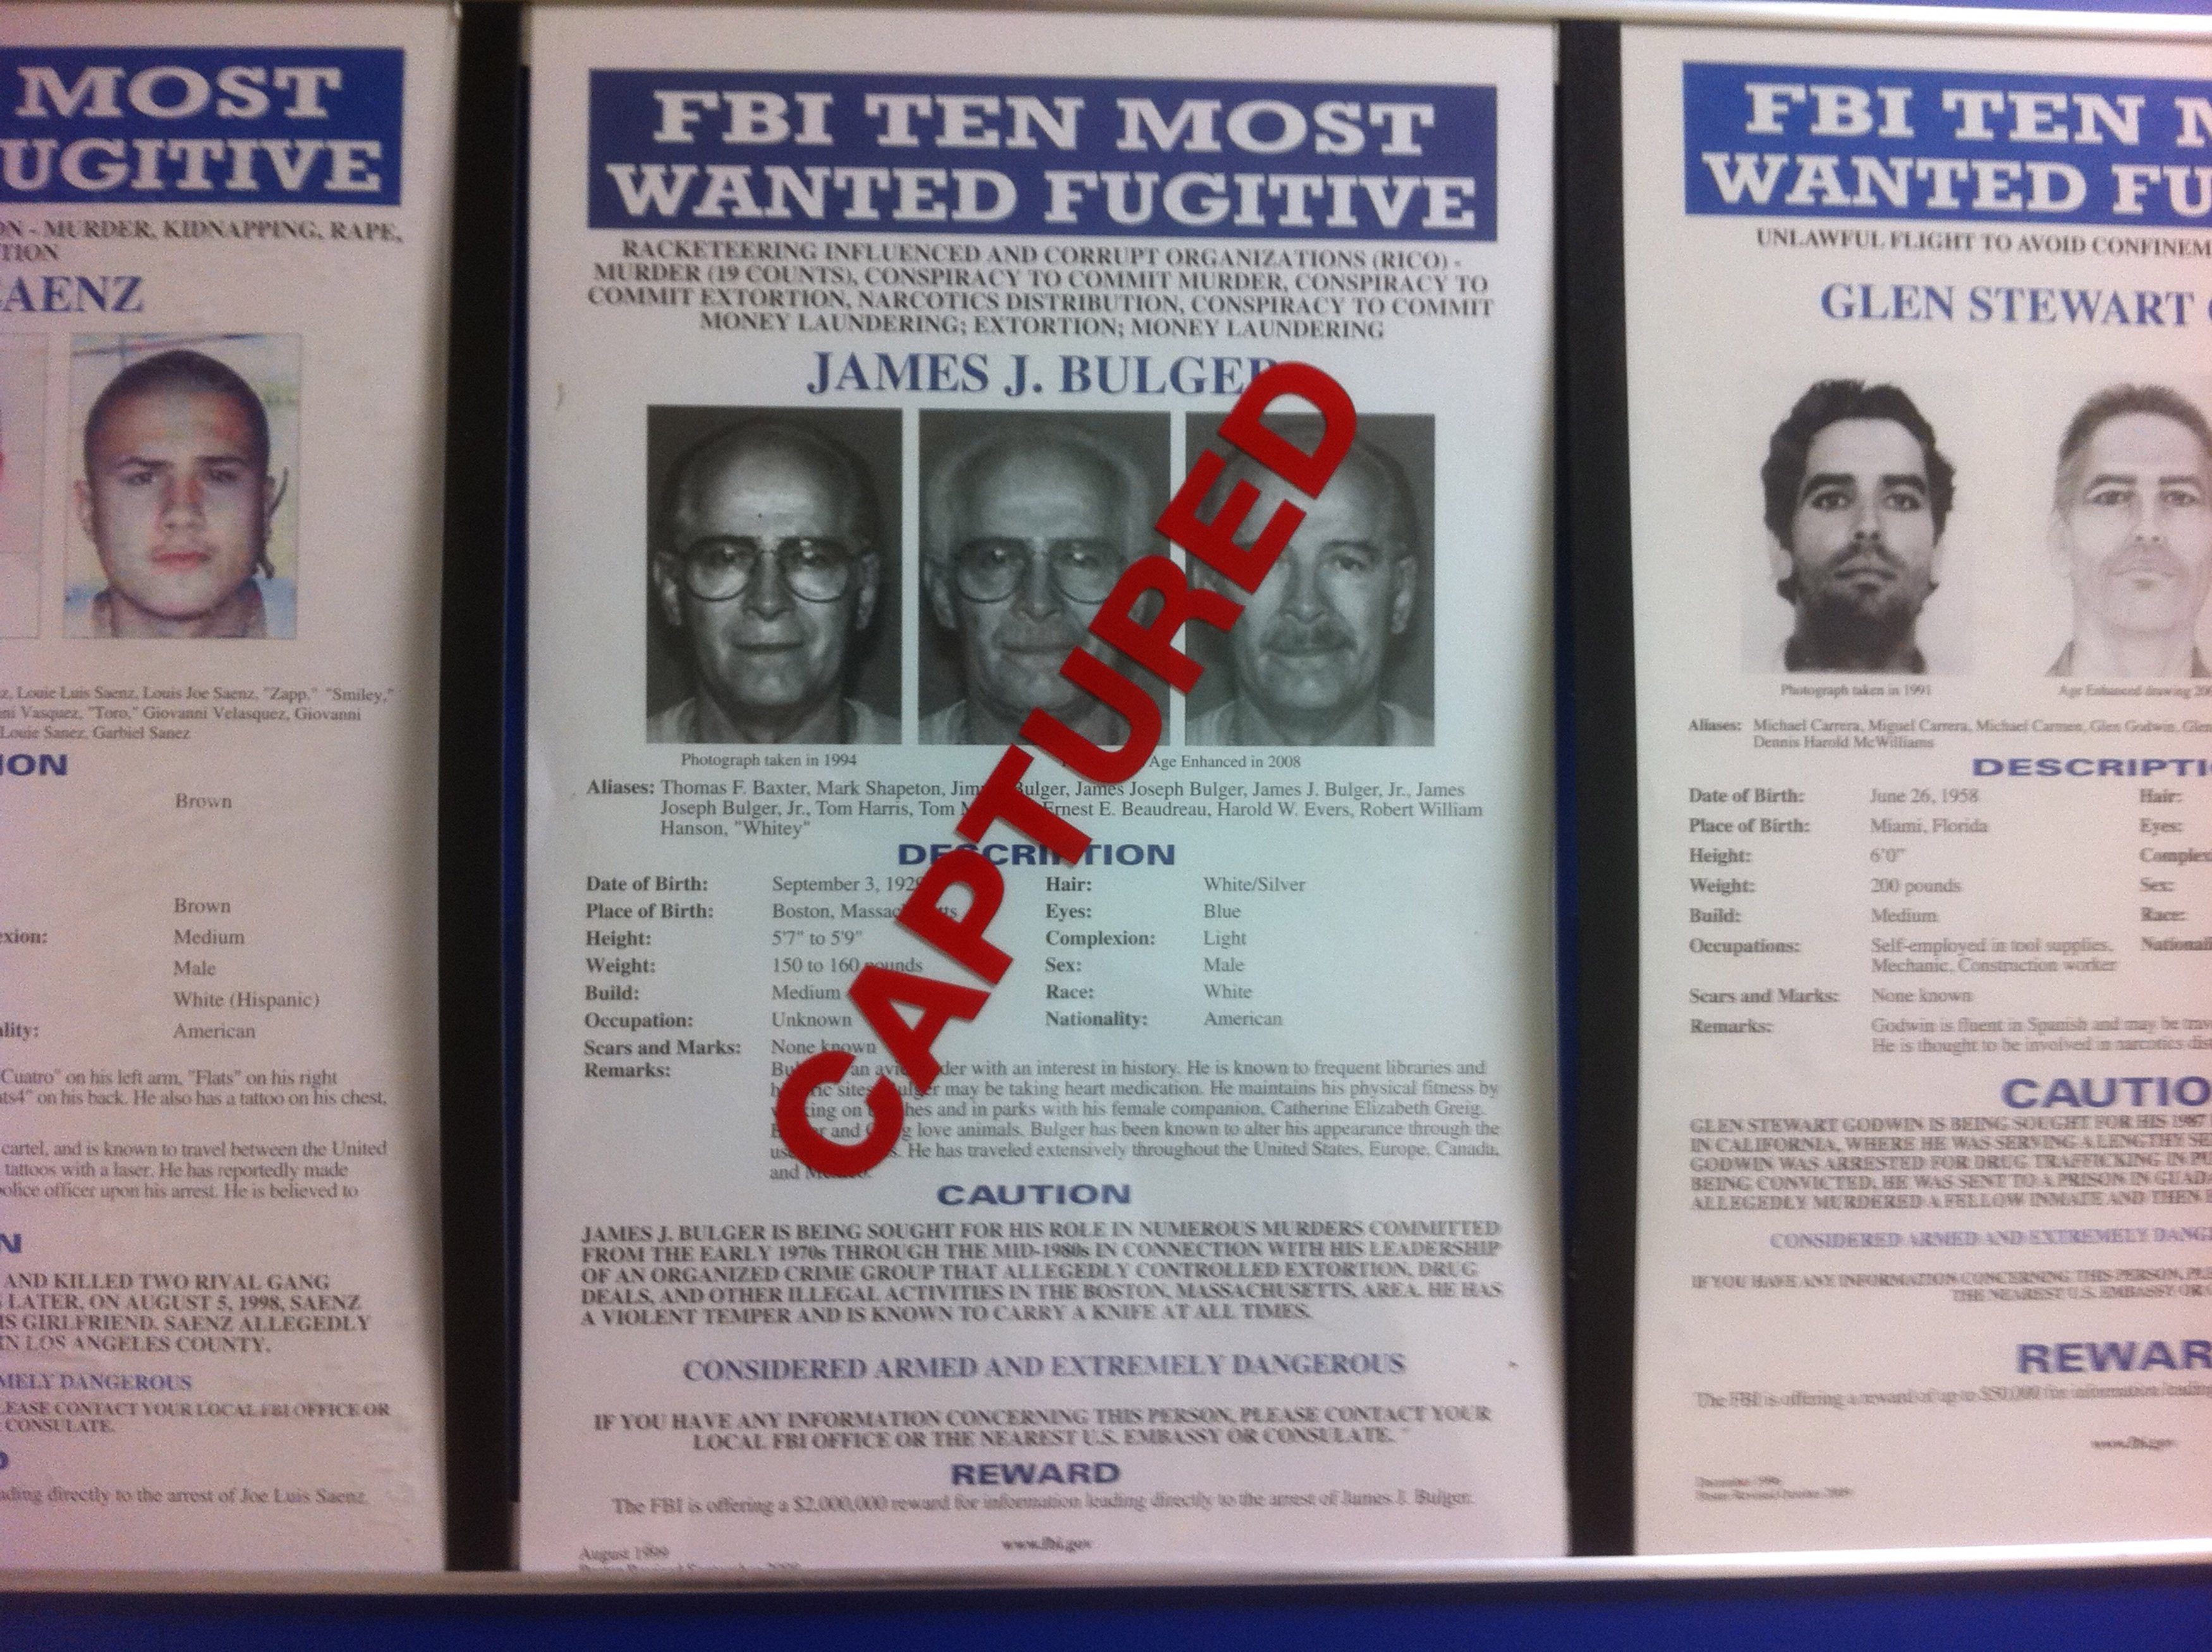 A most wanted poster for FBI Most Wanted fugitive and accused Boston crime boss James "Whitey" Bulger, is seen marked "CAPTURED" on a wall with other fugitive wanted posters at FBI headquarters in Washington, June 23, 2011. On the run for 17 years, Bulger and his longtime girlfriend were finally caught in California by the Federal Bureau of Investigation on Wednesday. REUTERS/FBI/Handout